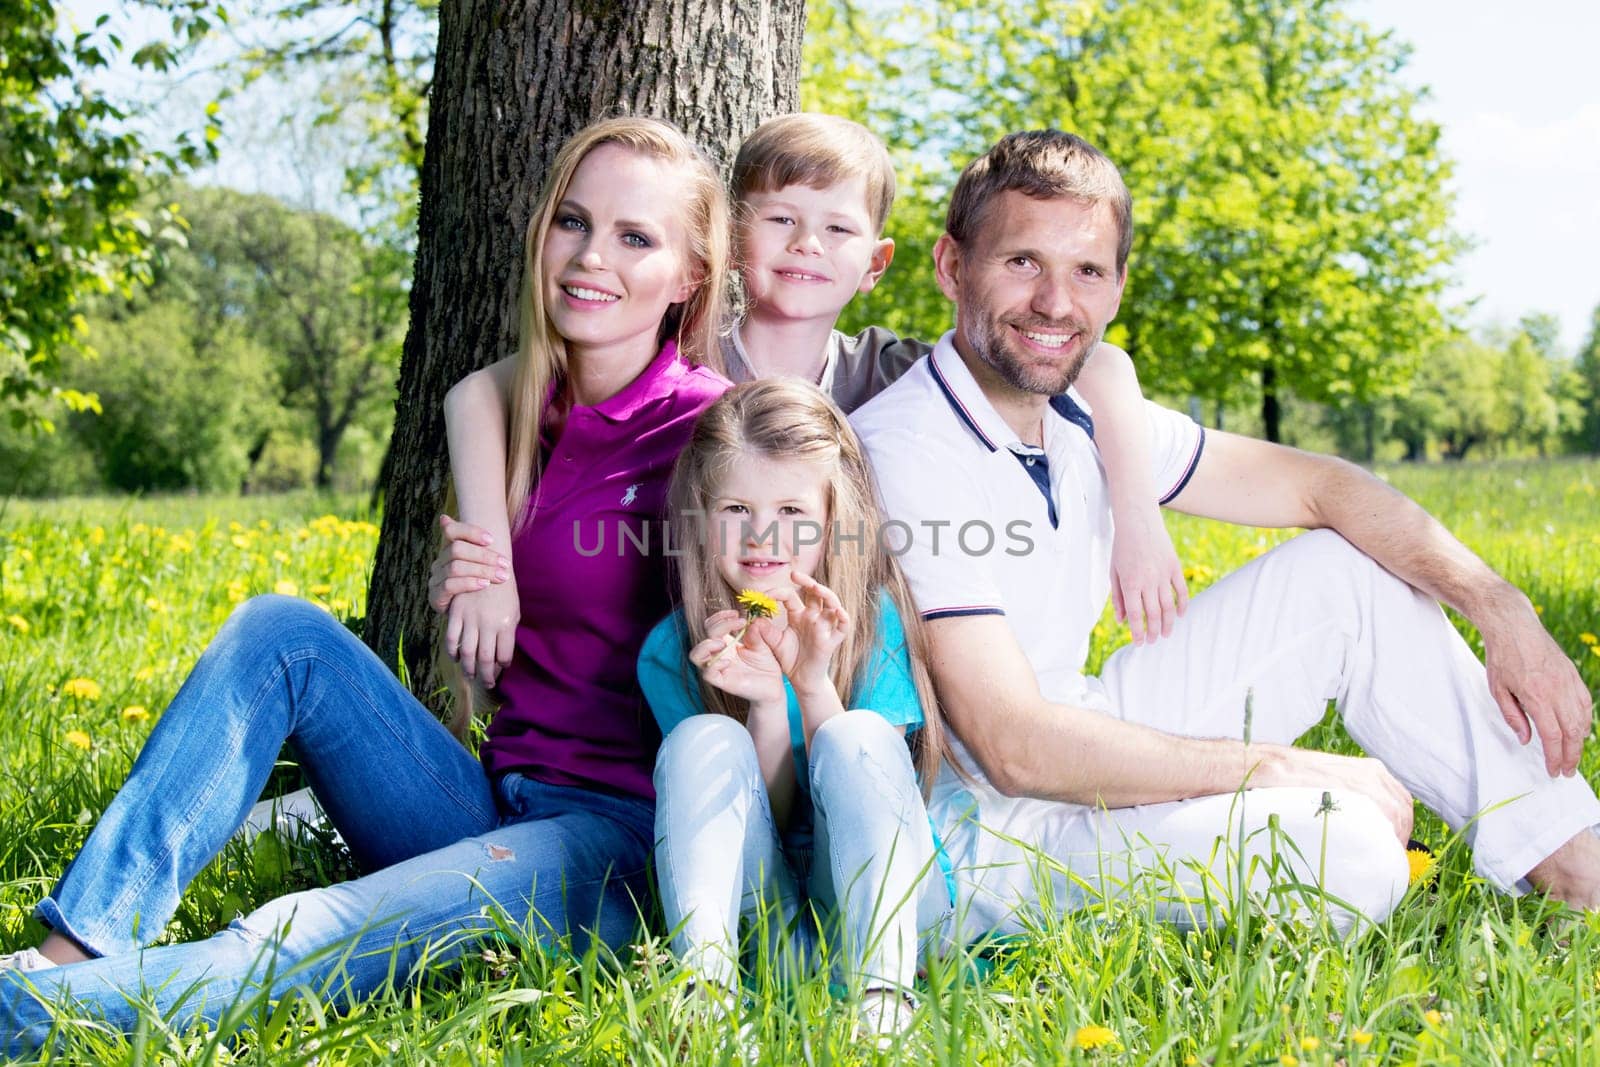 Happy family of parents and two children sitting on grass in spring park